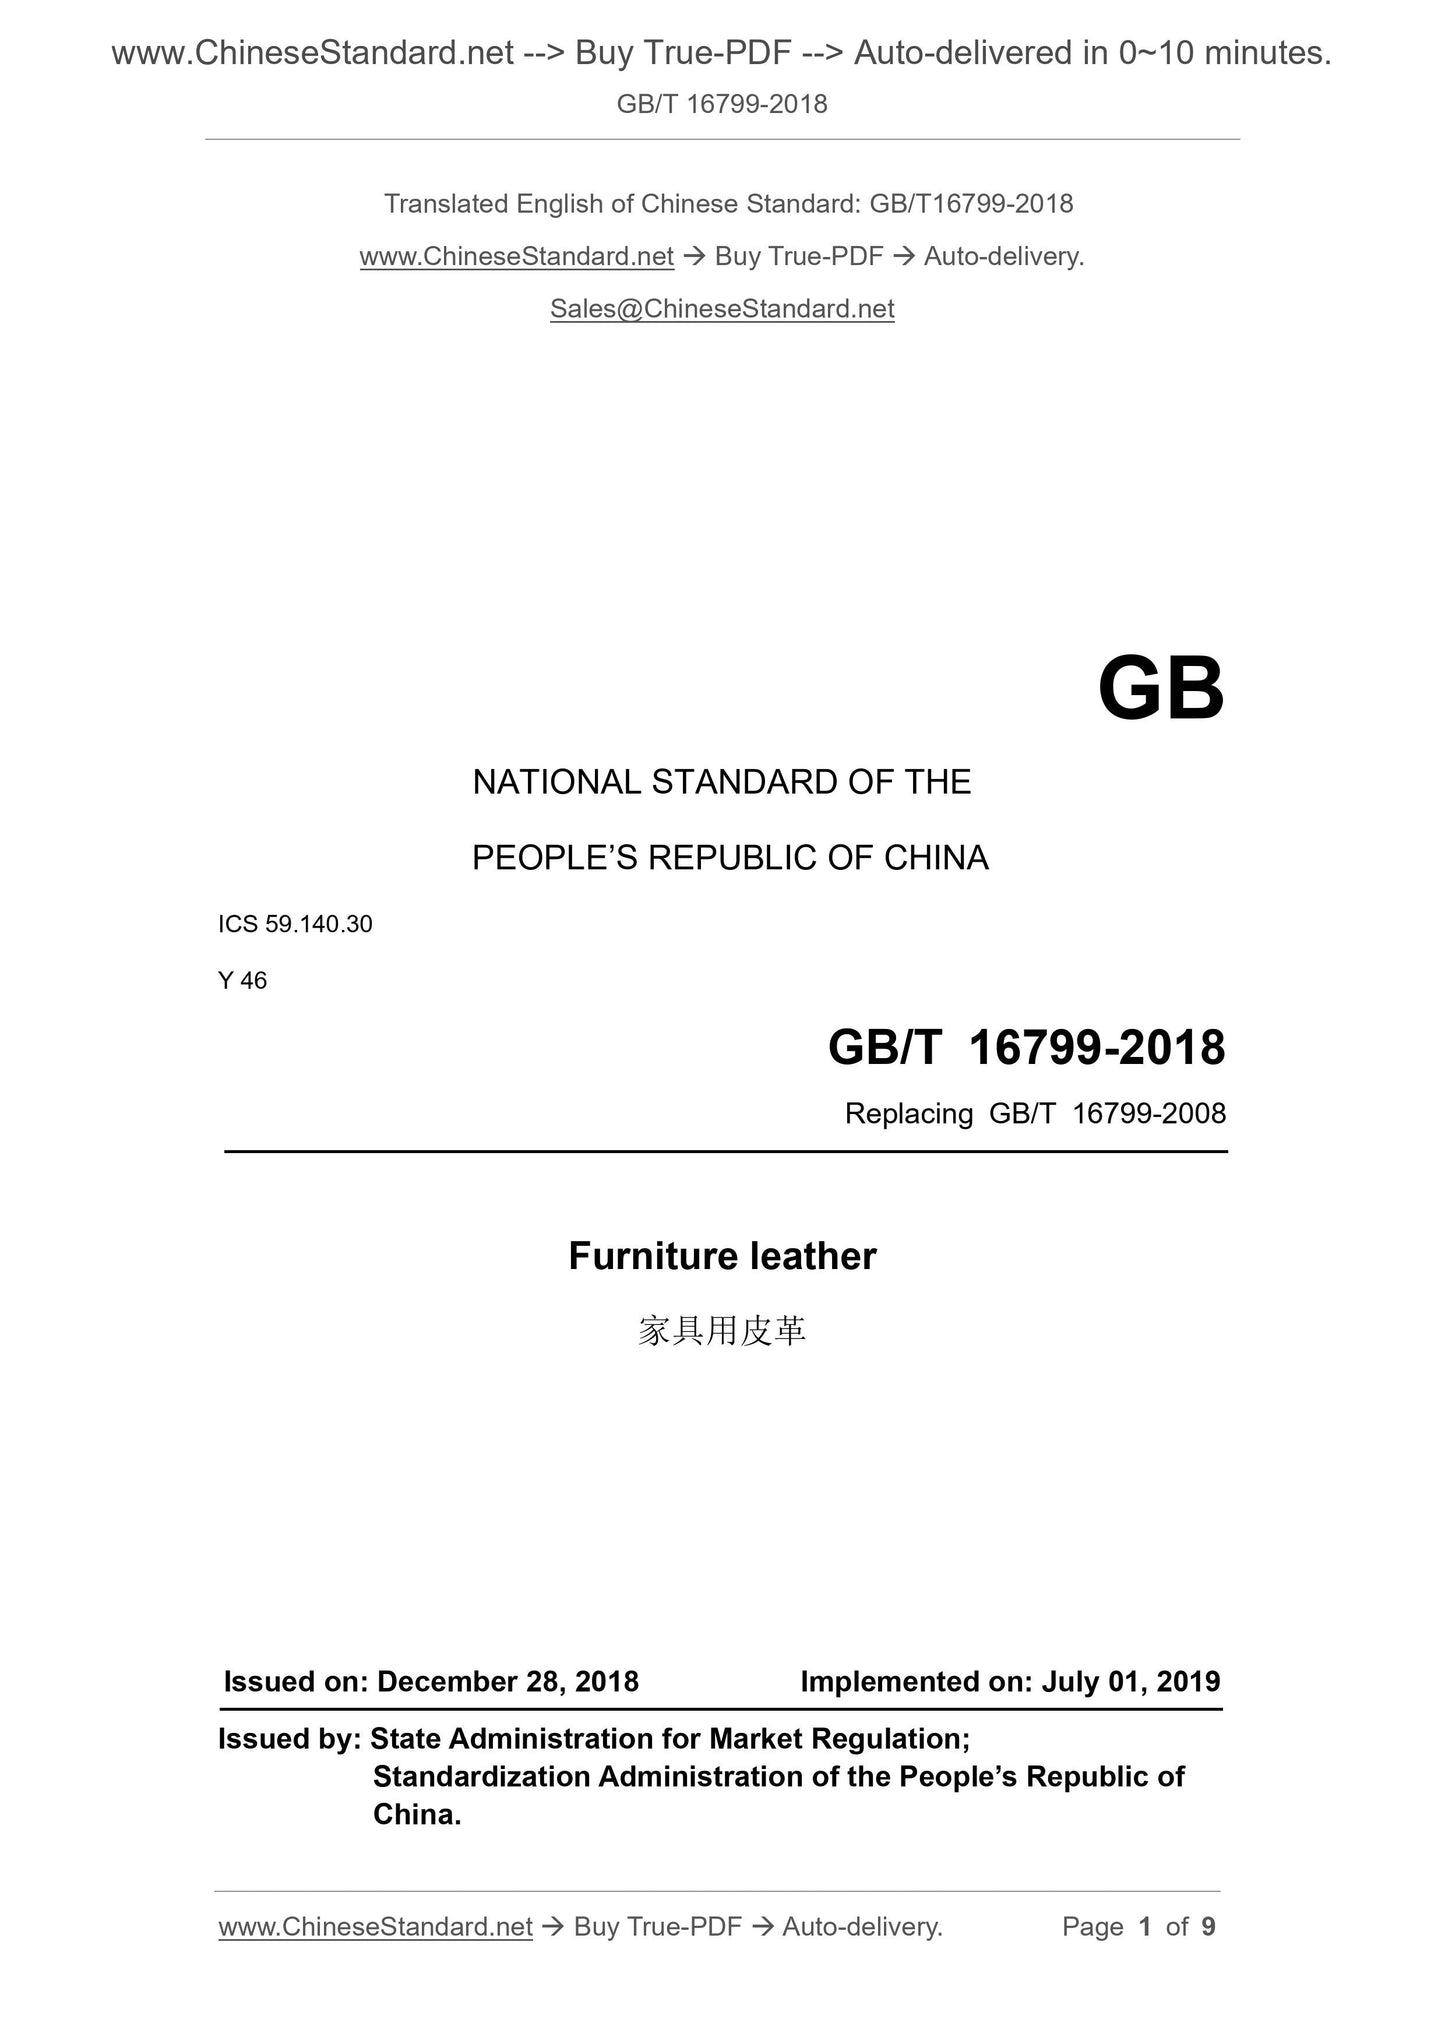 GB/T 16799-2018 Page 1